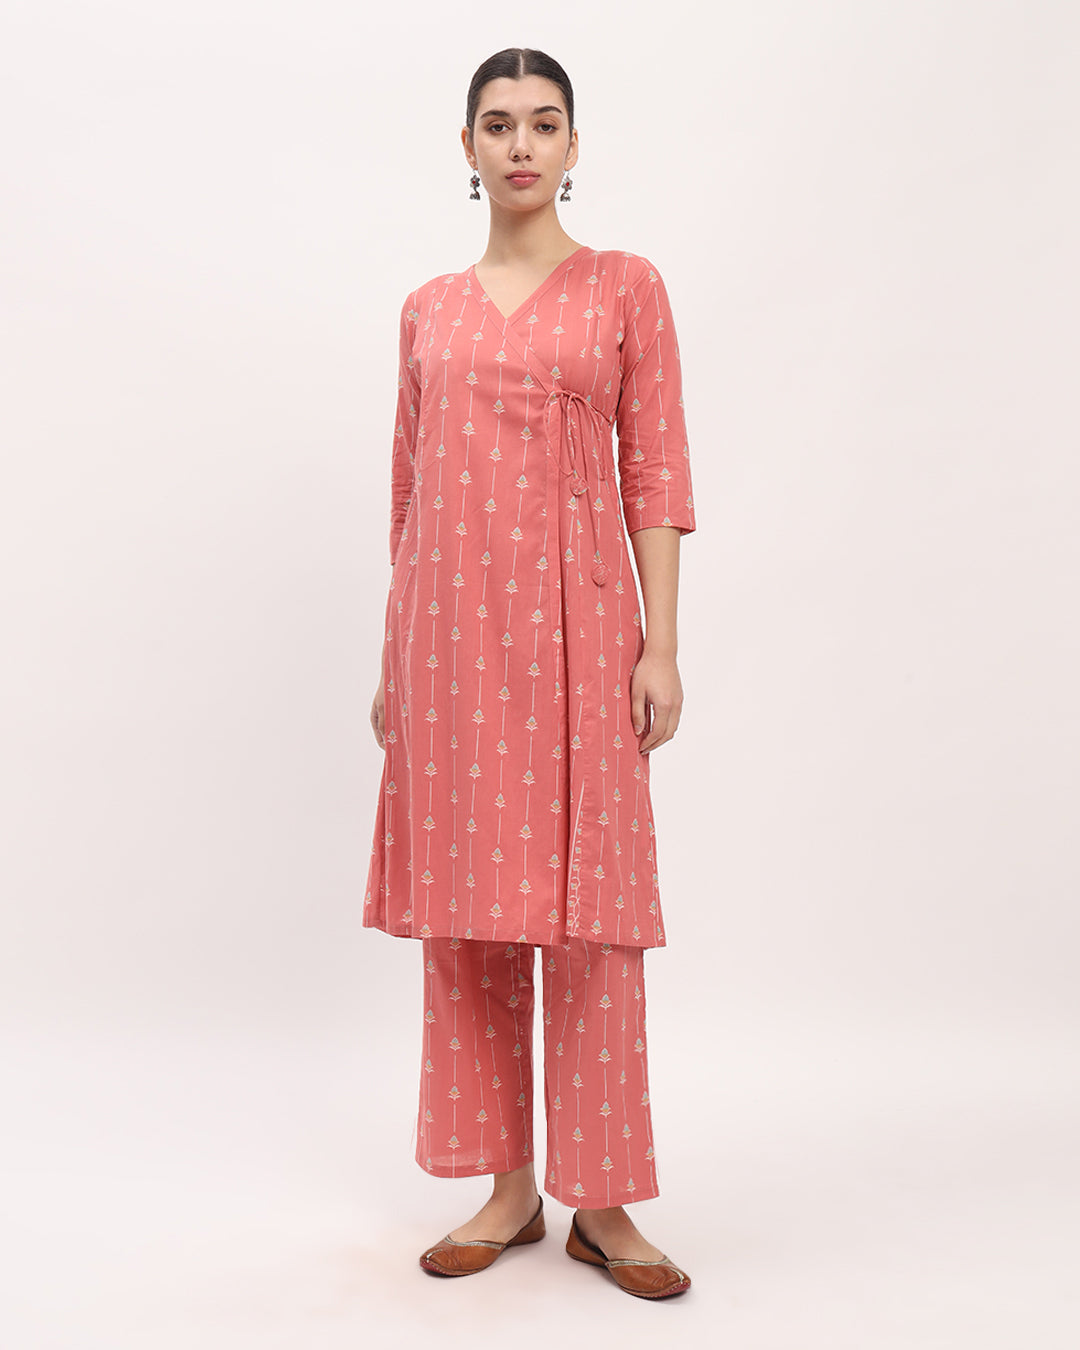 Combo: English Floral Garden & Blue Starry Tropical Angrakha Printed Kurta (Without Bottoms)